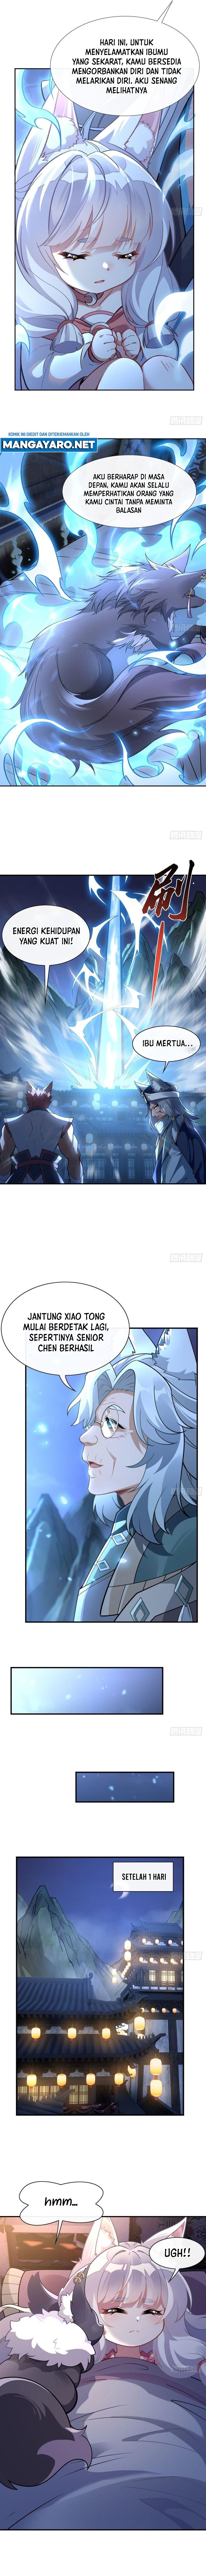 Dilarang COPAS - situs resmi www.mangacanblog.com - Komik my female apprentices are all big shots from the future 179 - chapter 179 180 Indonesia my female apprentices are all big shots from the future 179 - chapter 179 Terbaru 3|Baca Manga Komik Indonesia|Mangacan